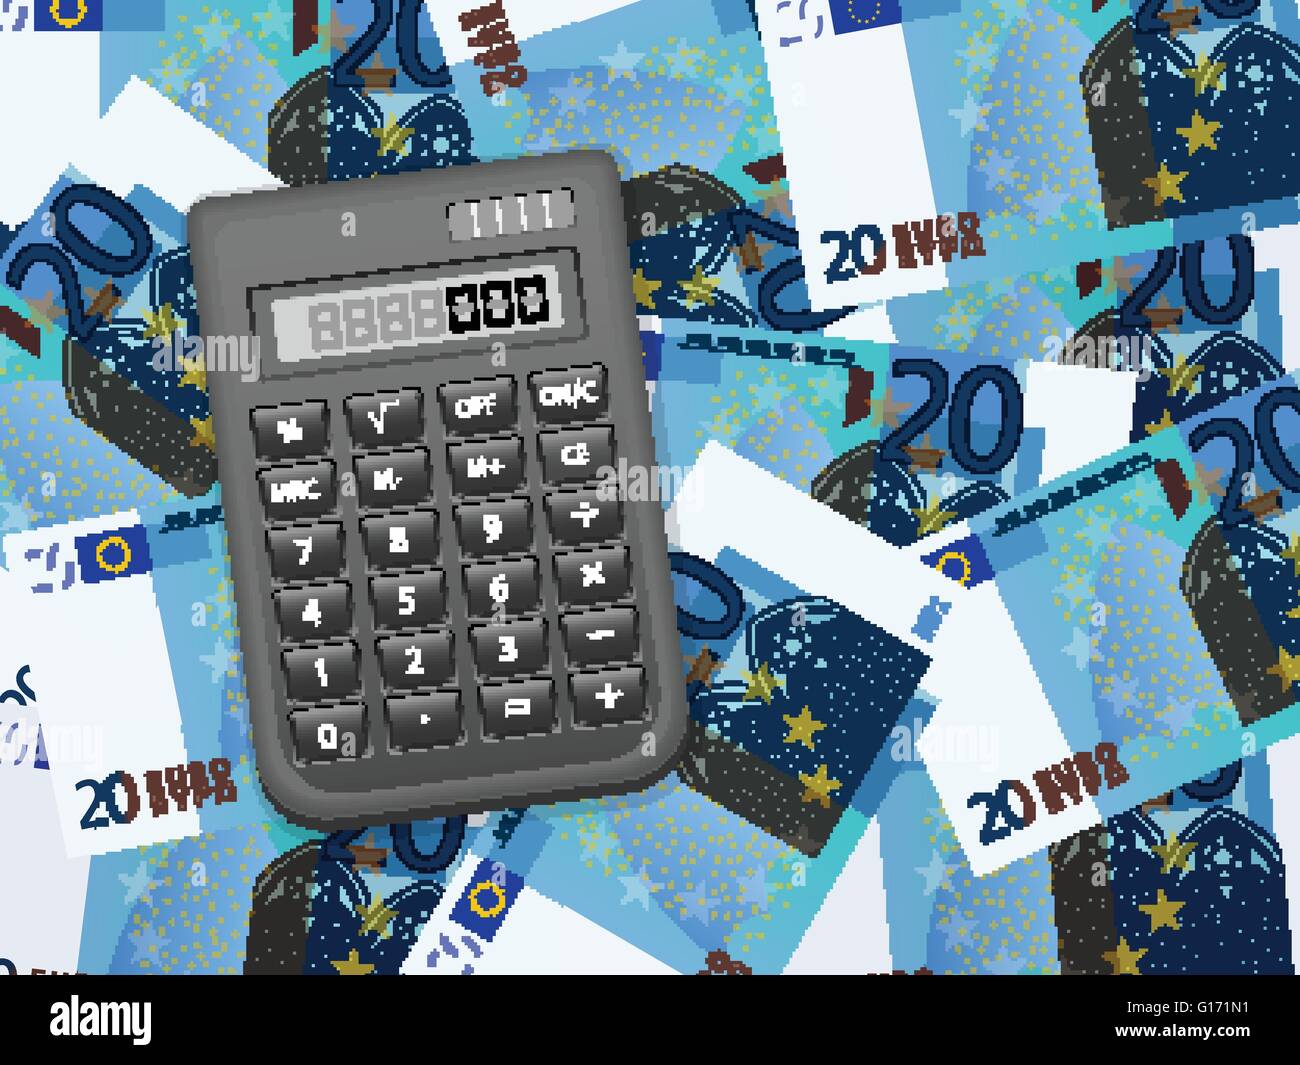 20 euro bill Stock Vector Images - Alamy